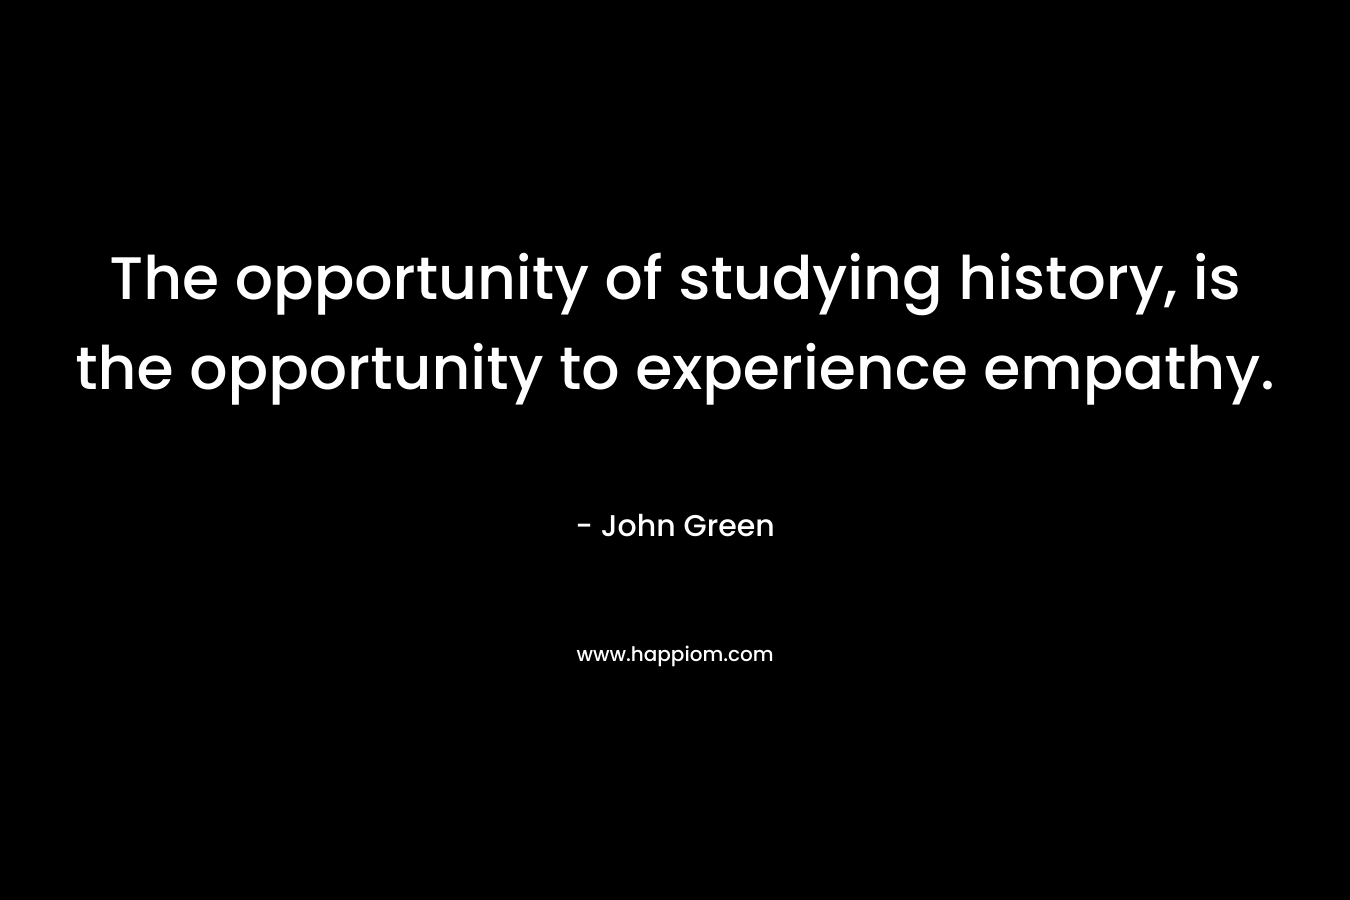 The opportunity of studying history, is the opportunity to experience empathy.